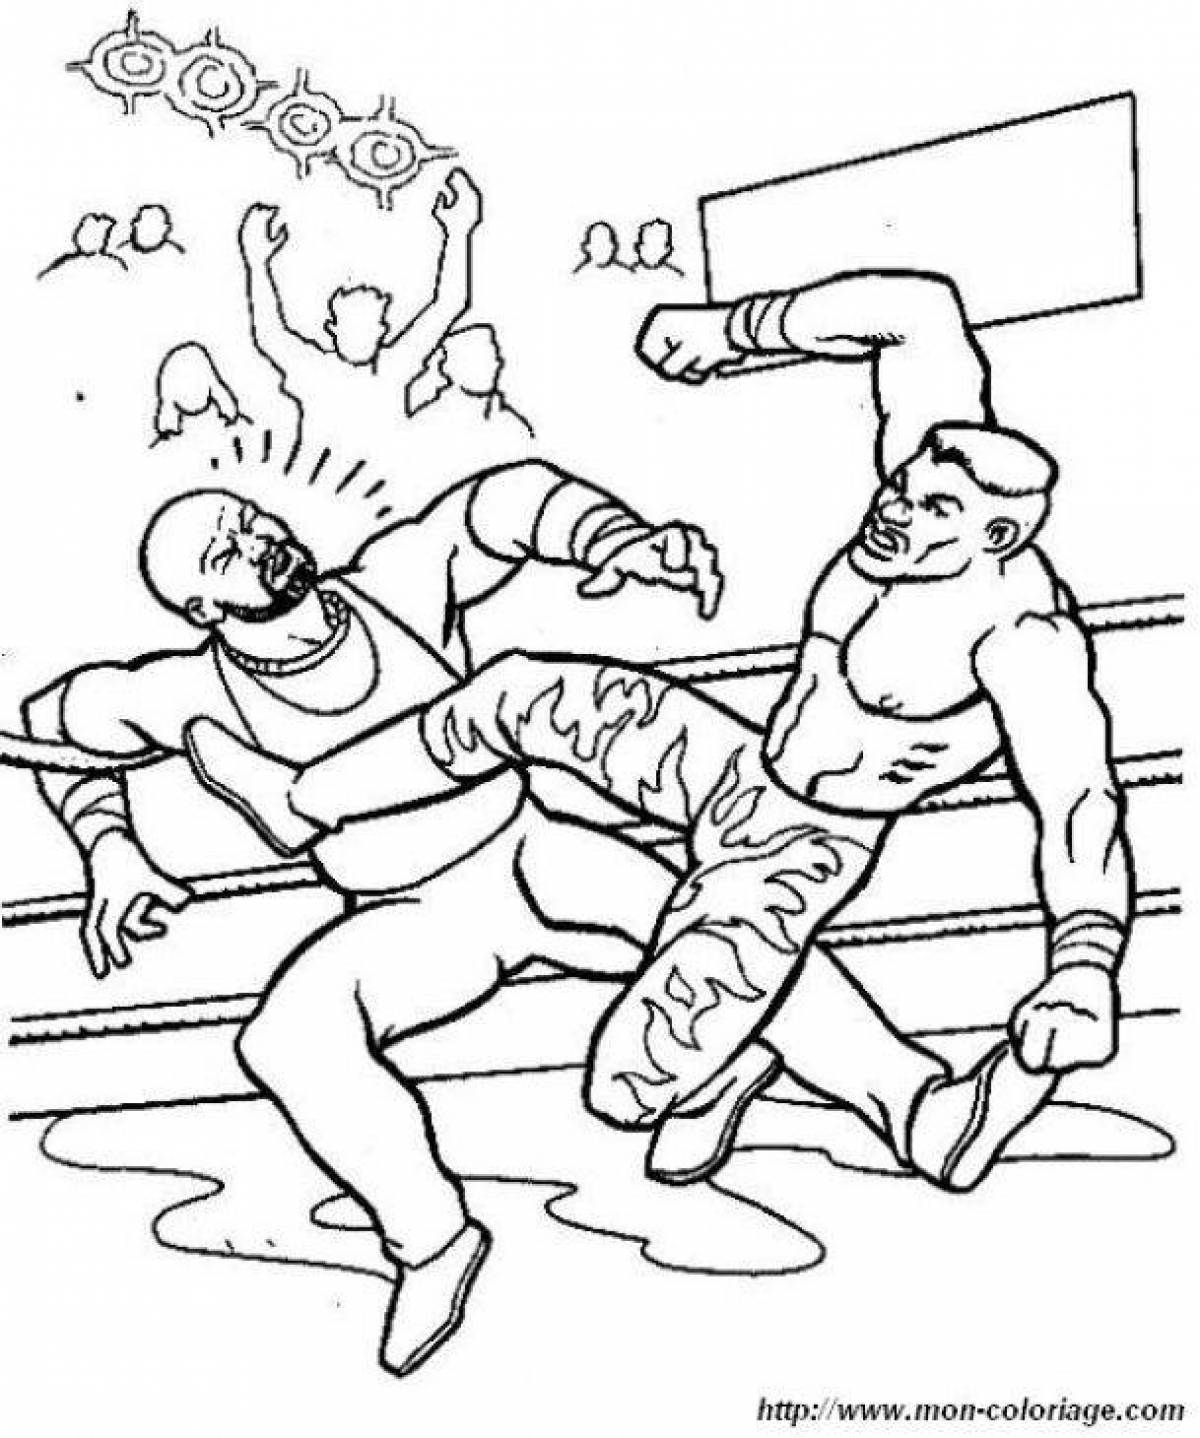 Entertaining boxing and boo coloring